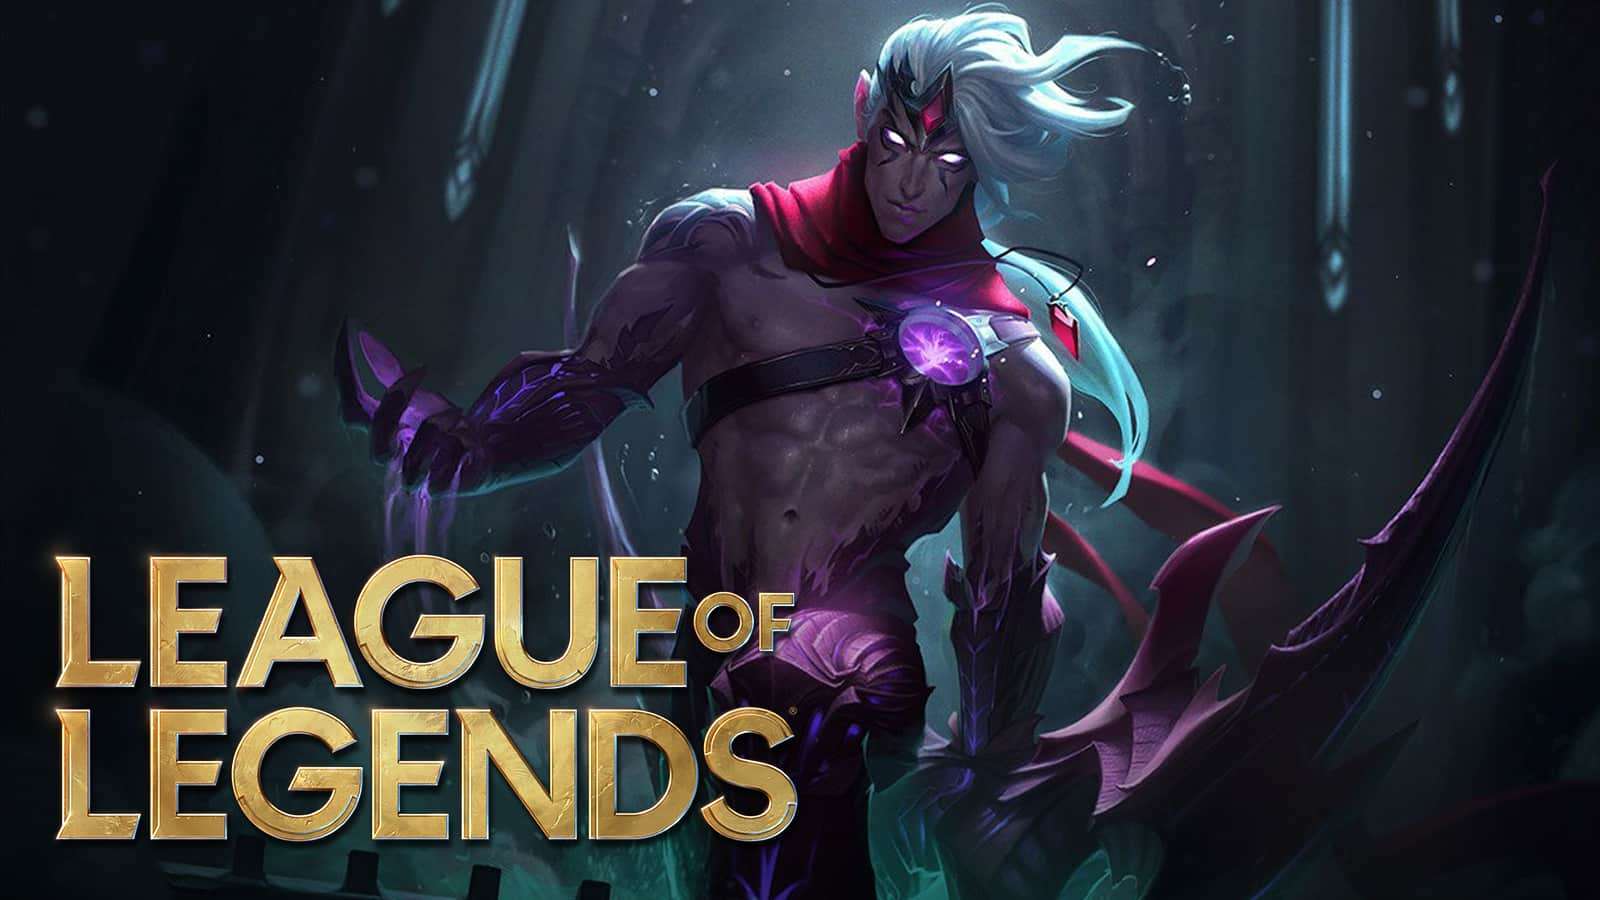 Varus from League of Legends.